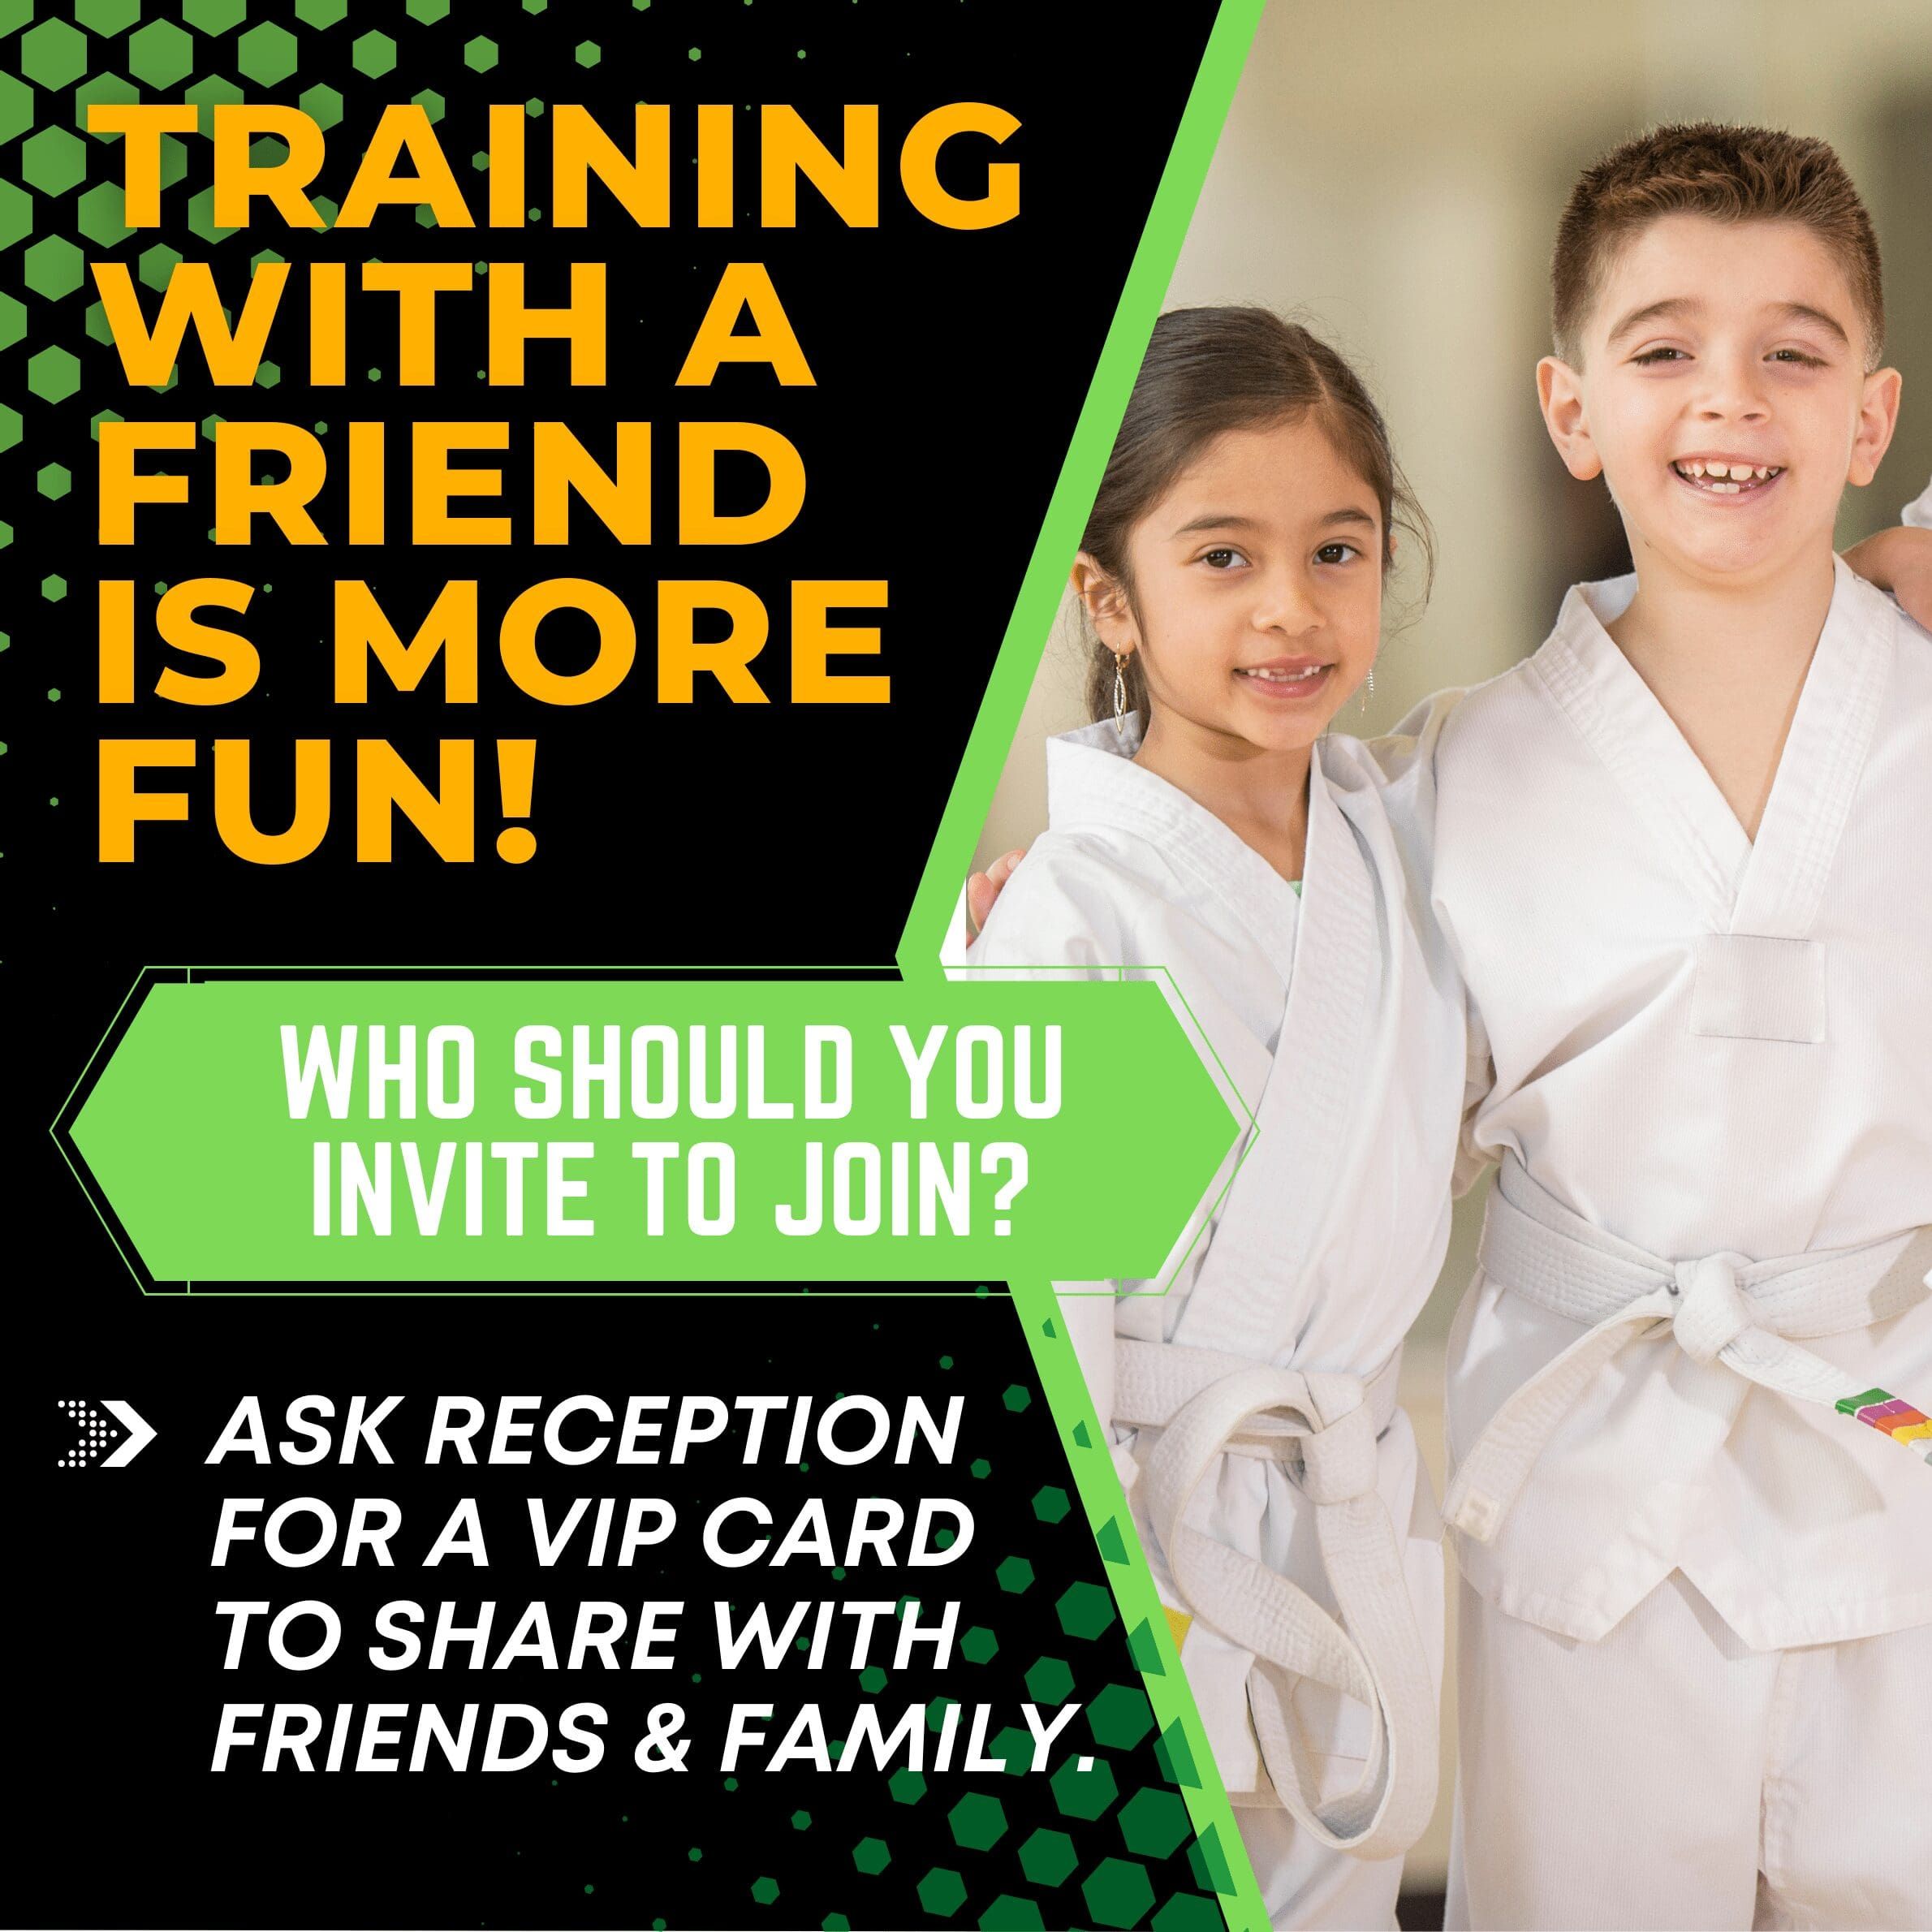 Refer a friend to martial arts lessons